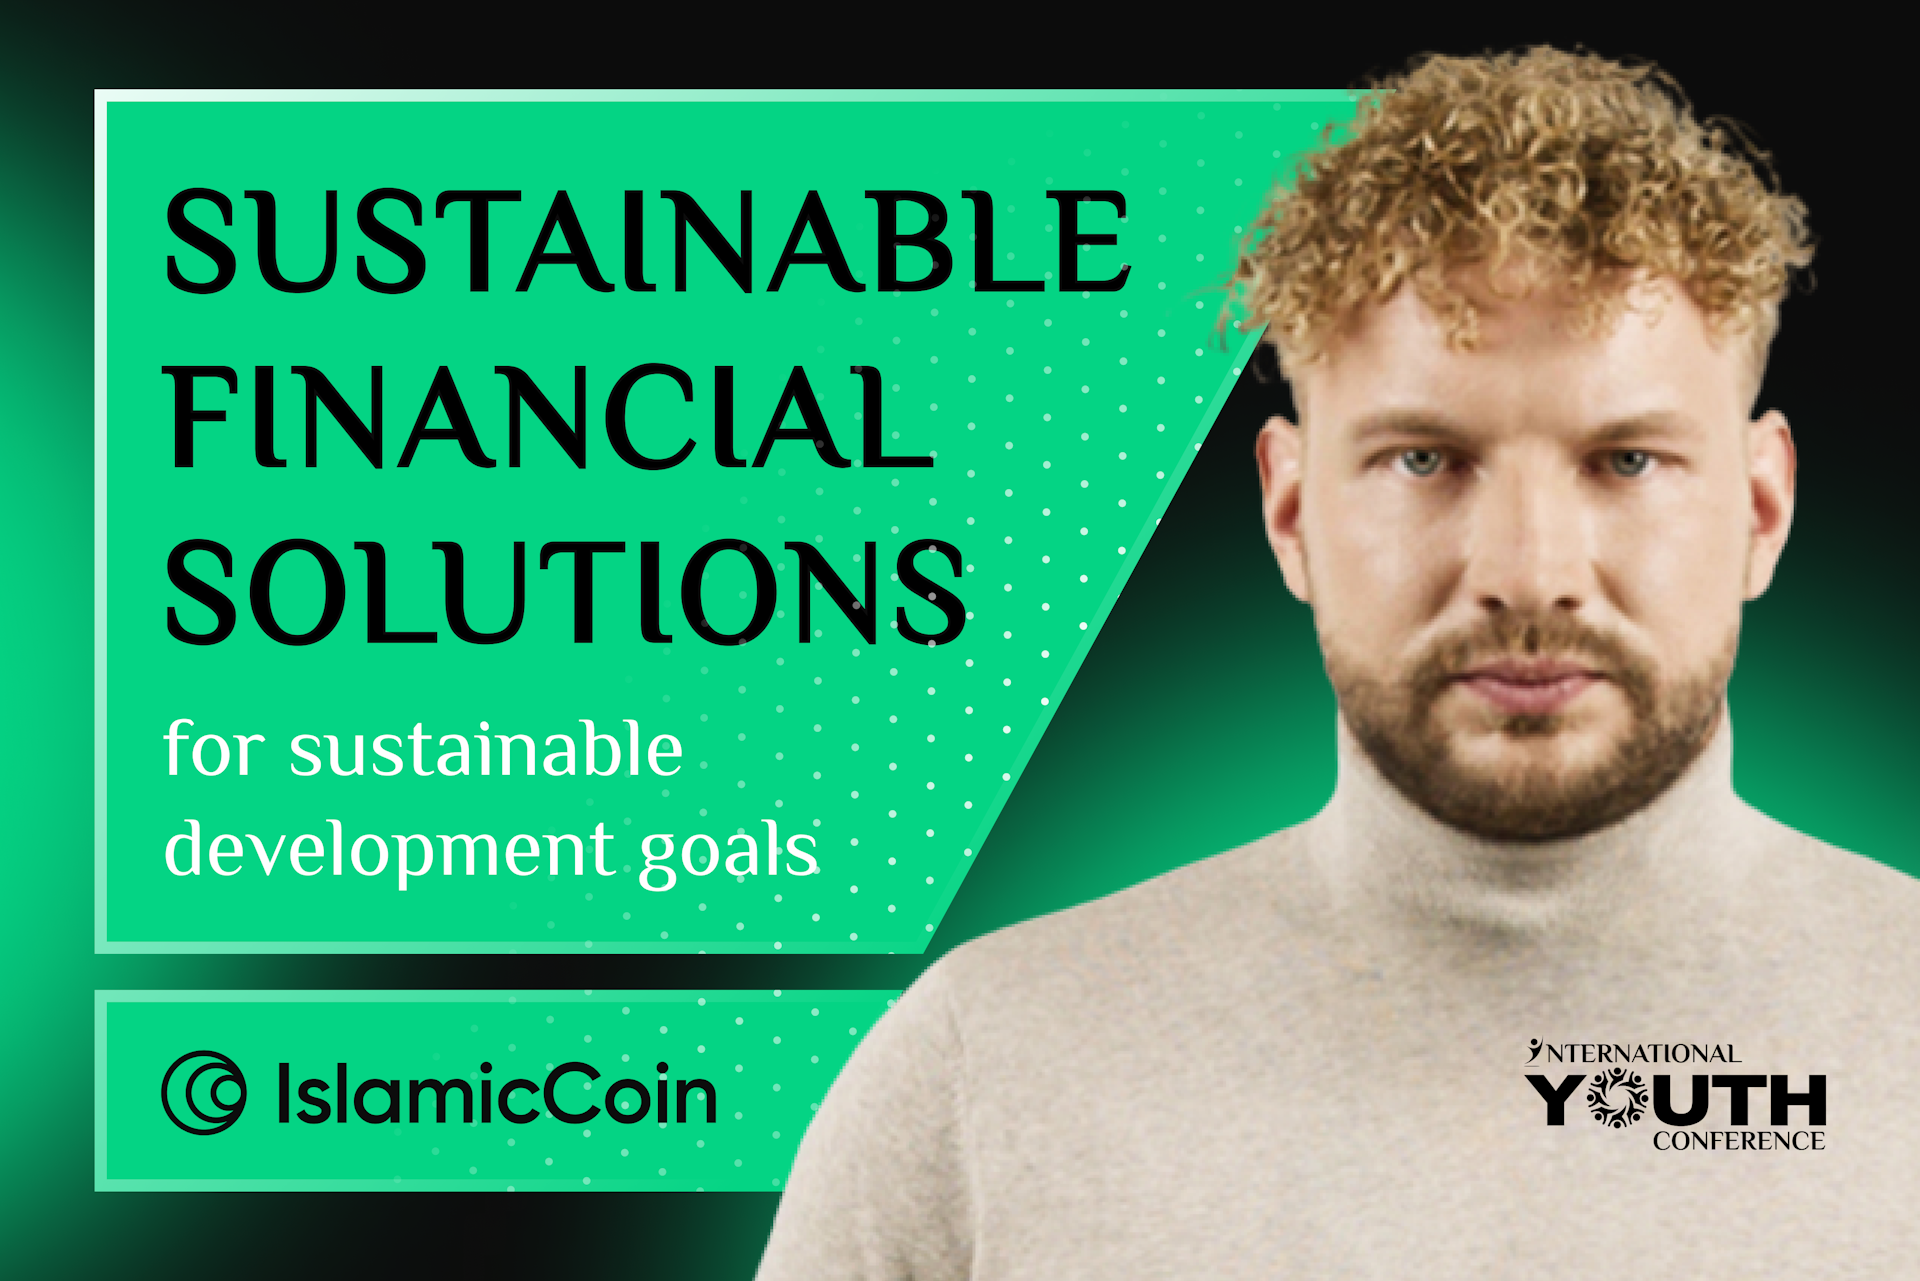 Co-founder Alex Malkov discusses sustainable financial solutions